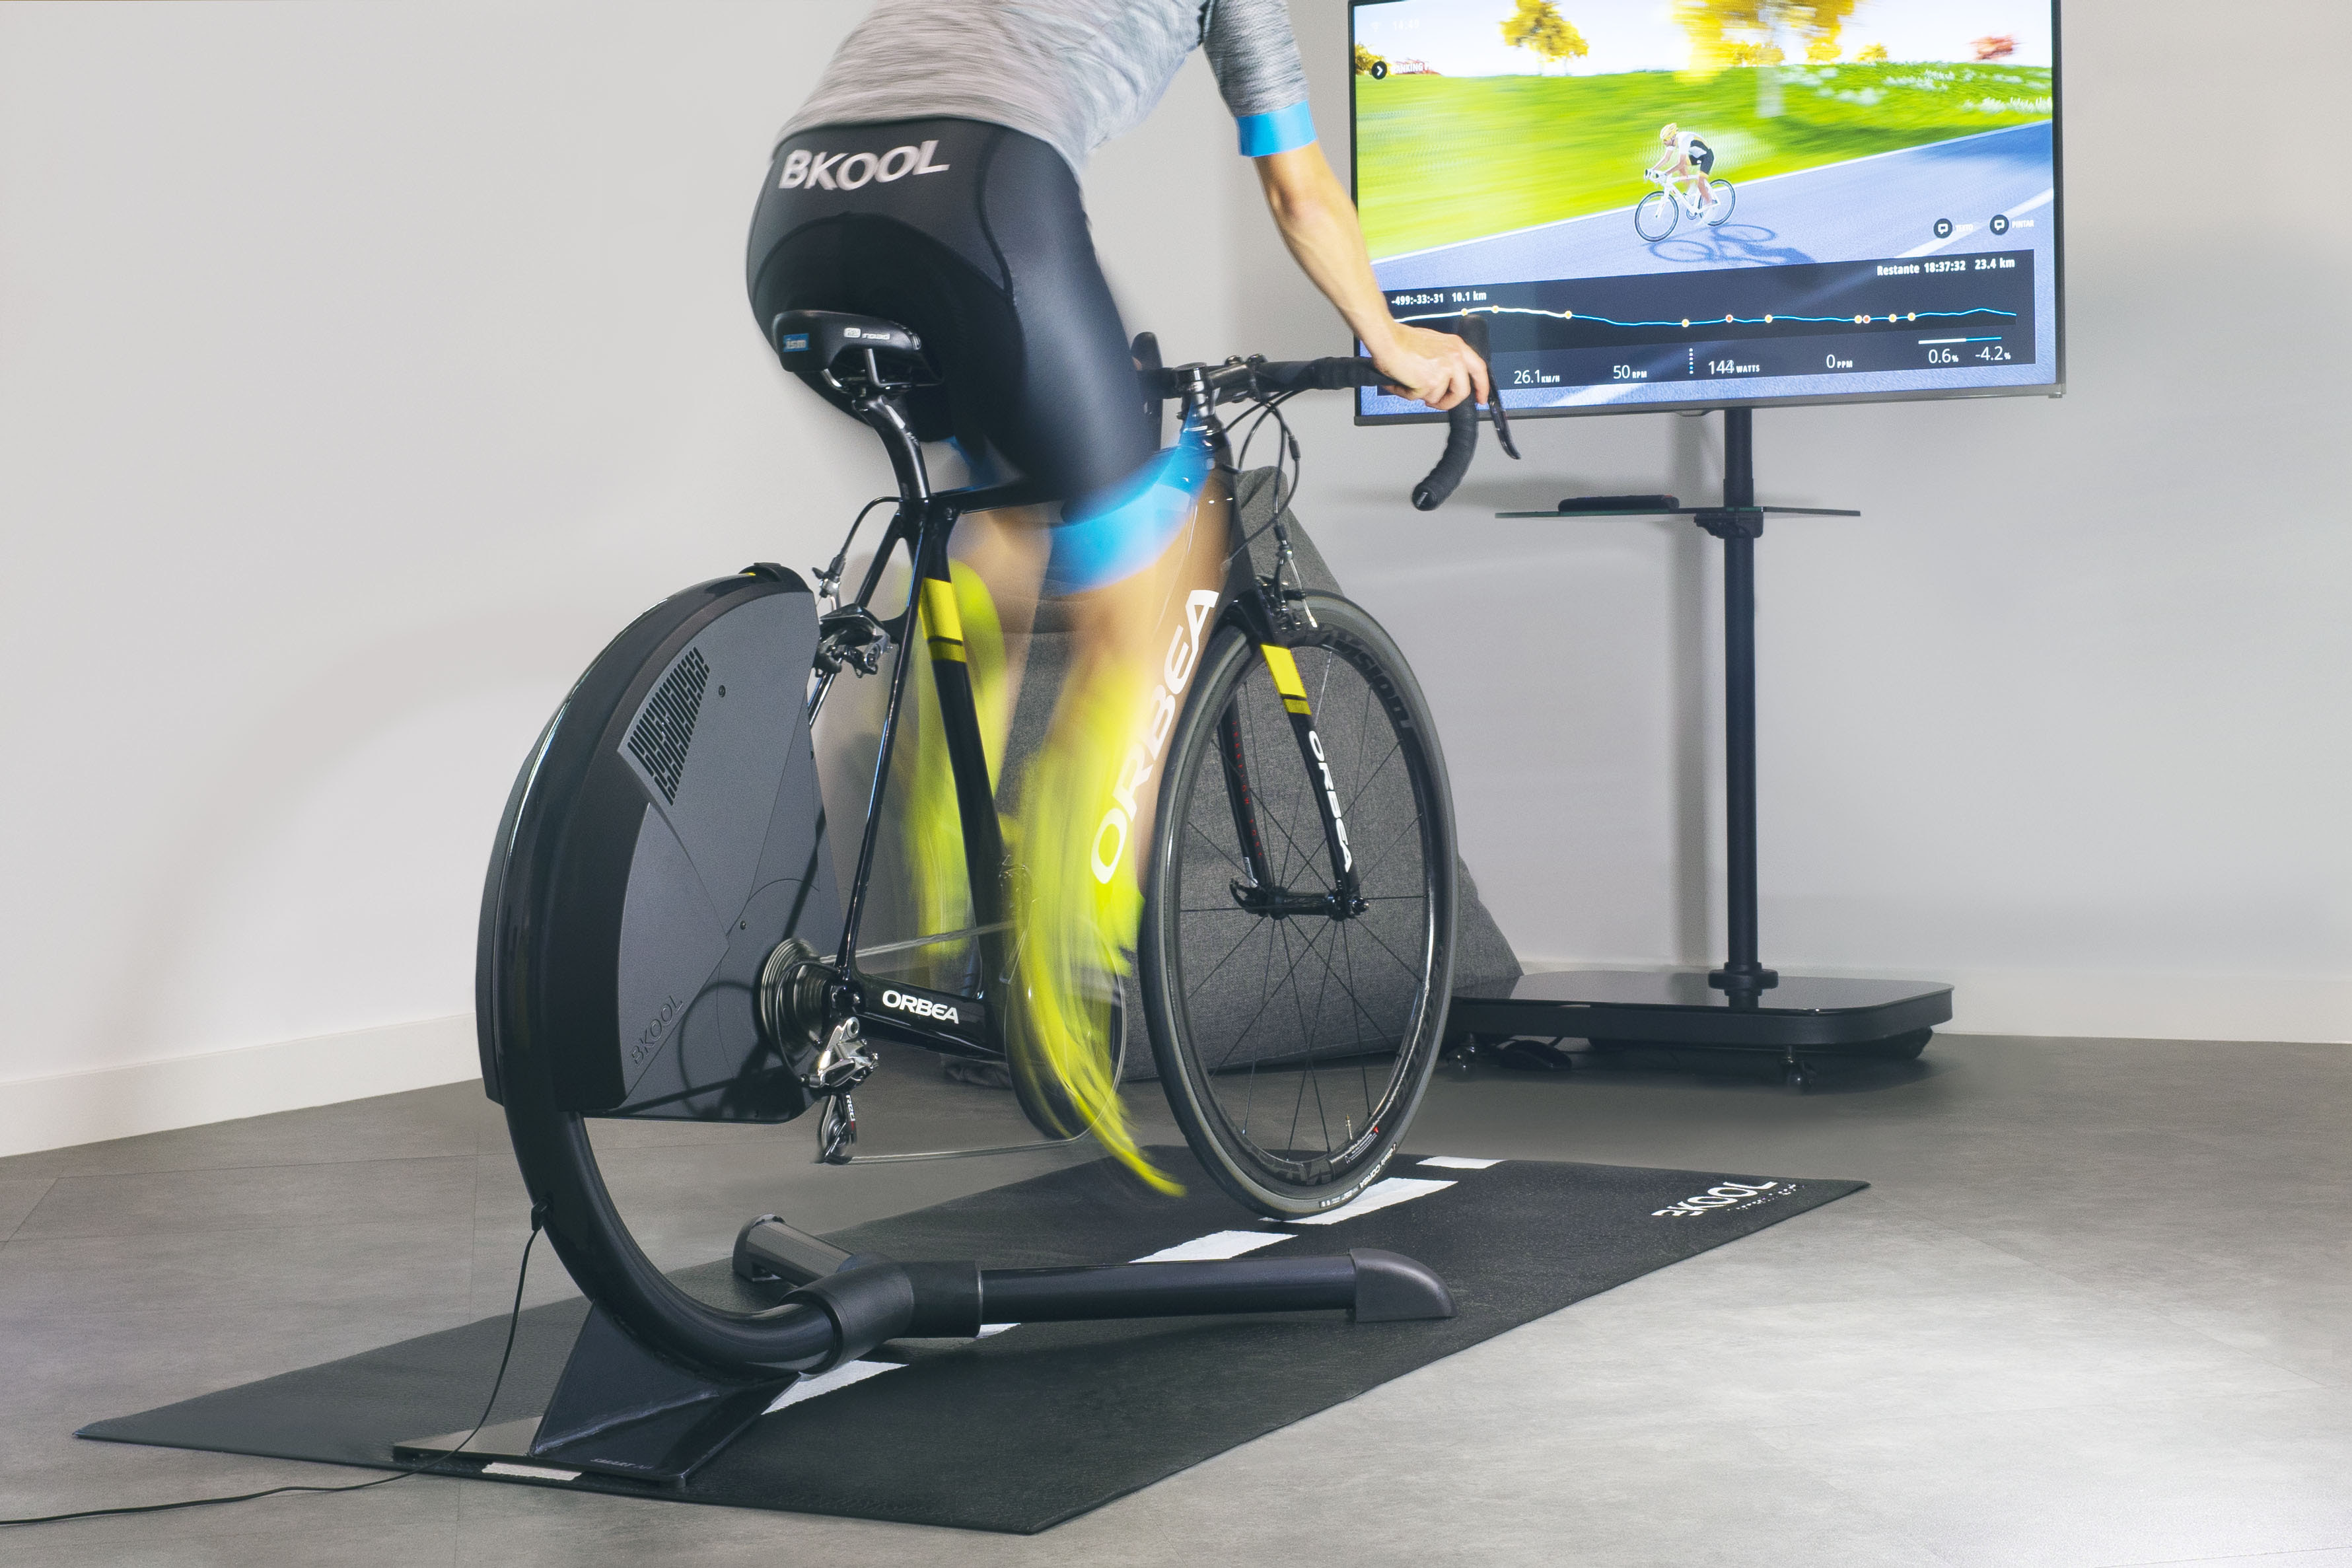 Bkool Smart Air rocks up with a new take on direct drive smart trainers